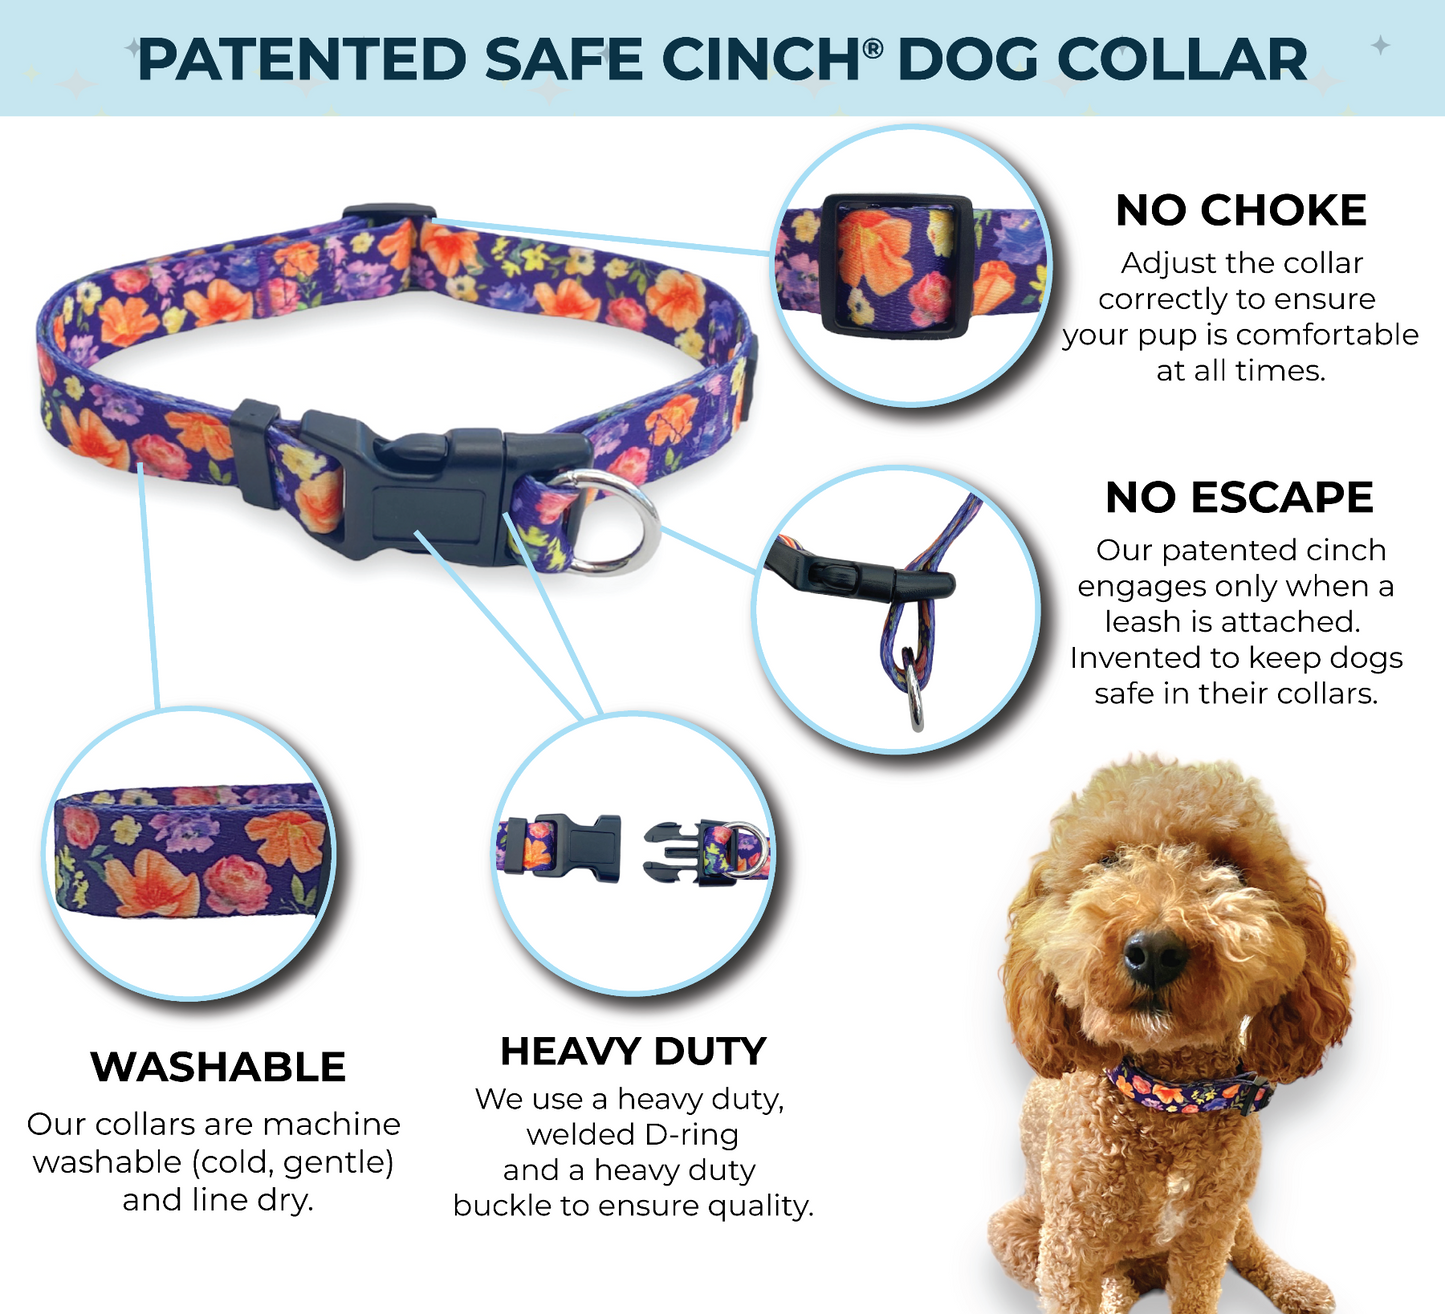 an infographic of a no escape safe cinch dog collar from fearless pet